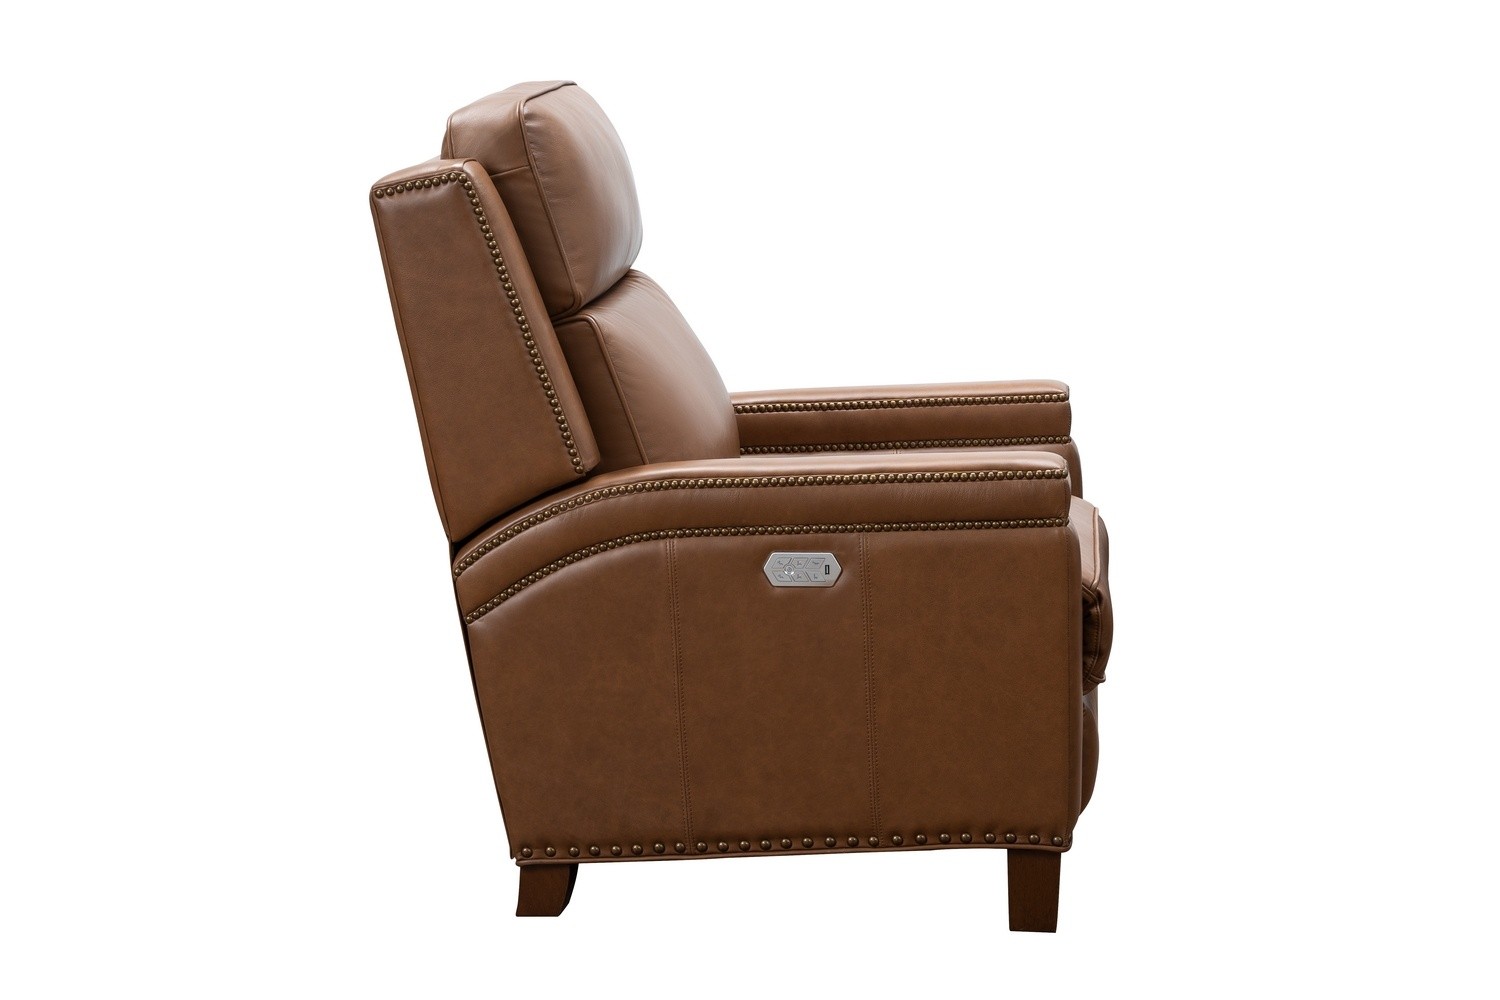 Barcalounger Smithfield Big and Tall Power Recliner Chair with Power Head Rest and Lumbar - Bennington Saddle/All Leather